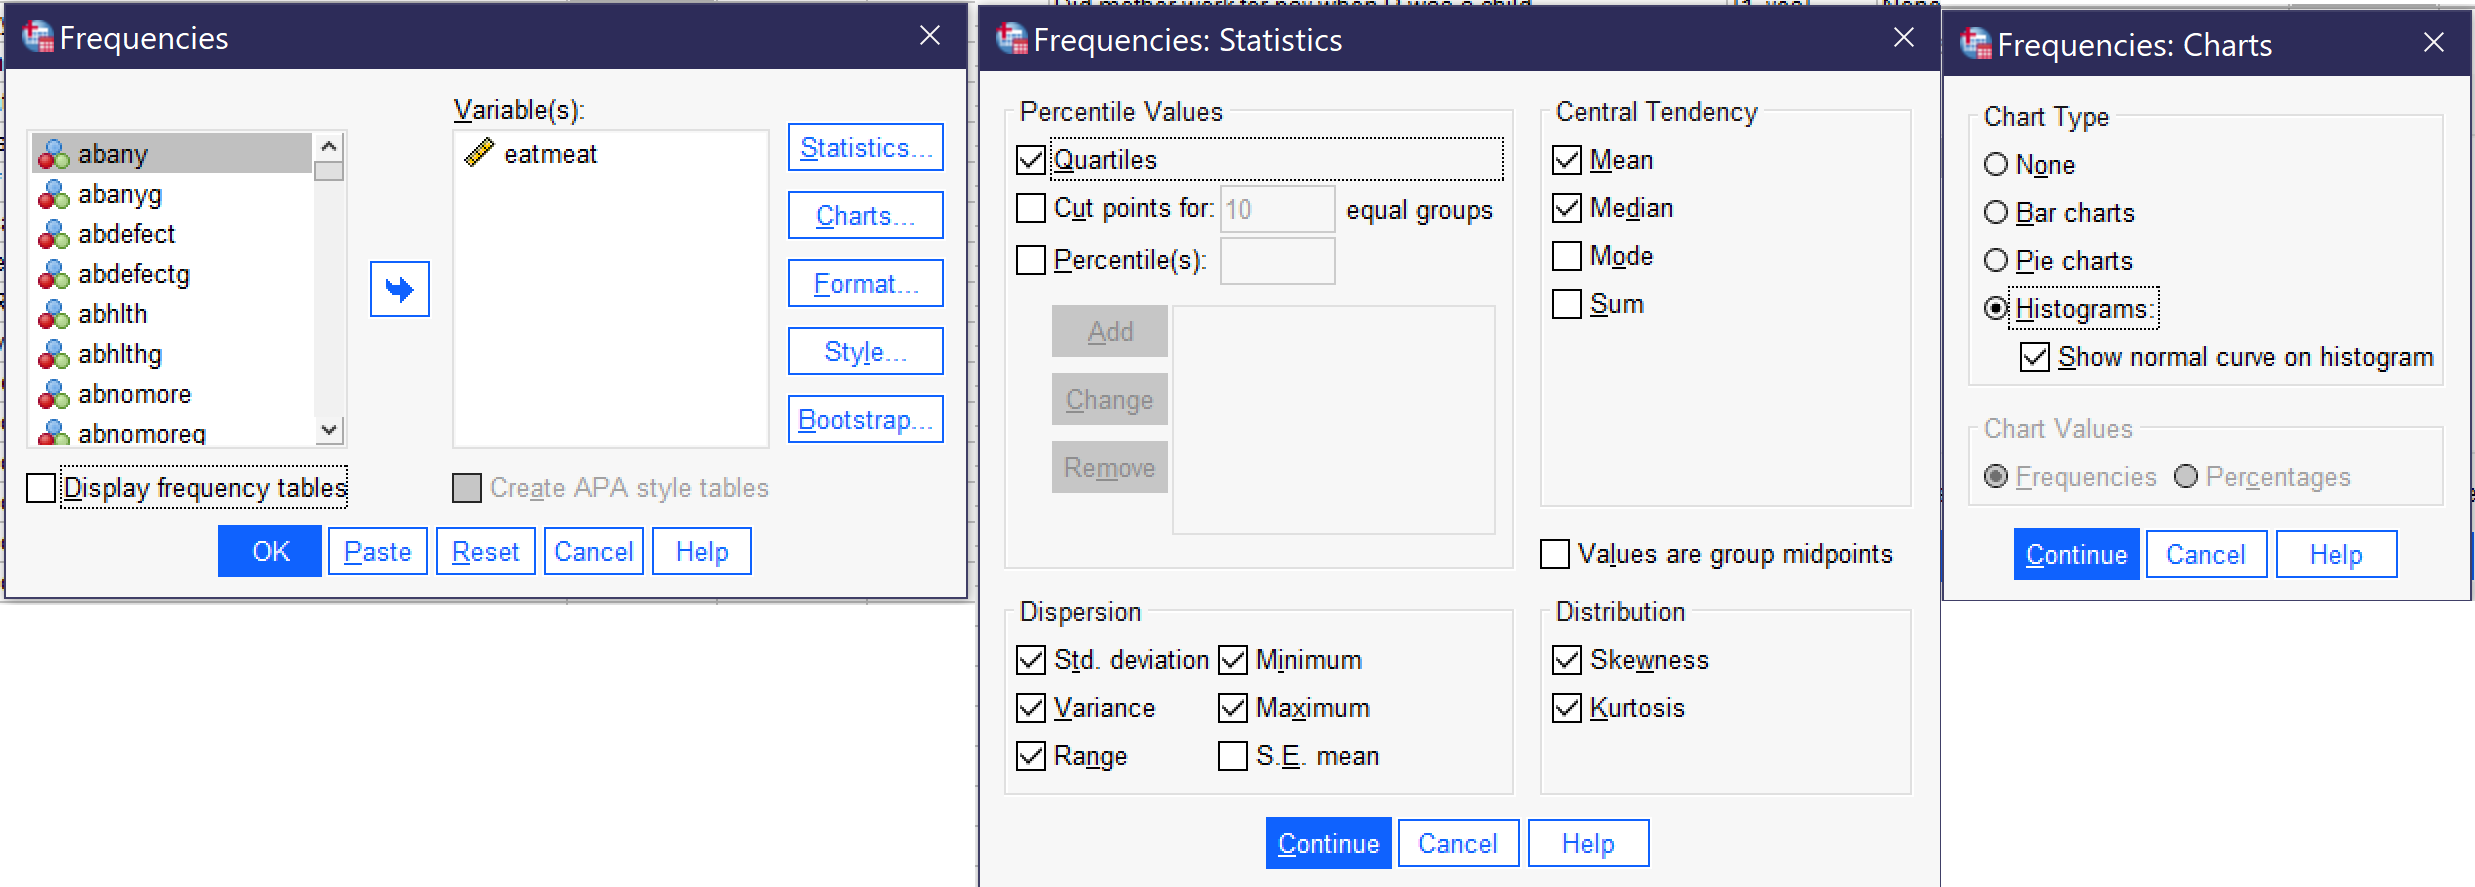 An image showing what the Frequencies, Statistics, and Charts dialogs look like with the options selected.